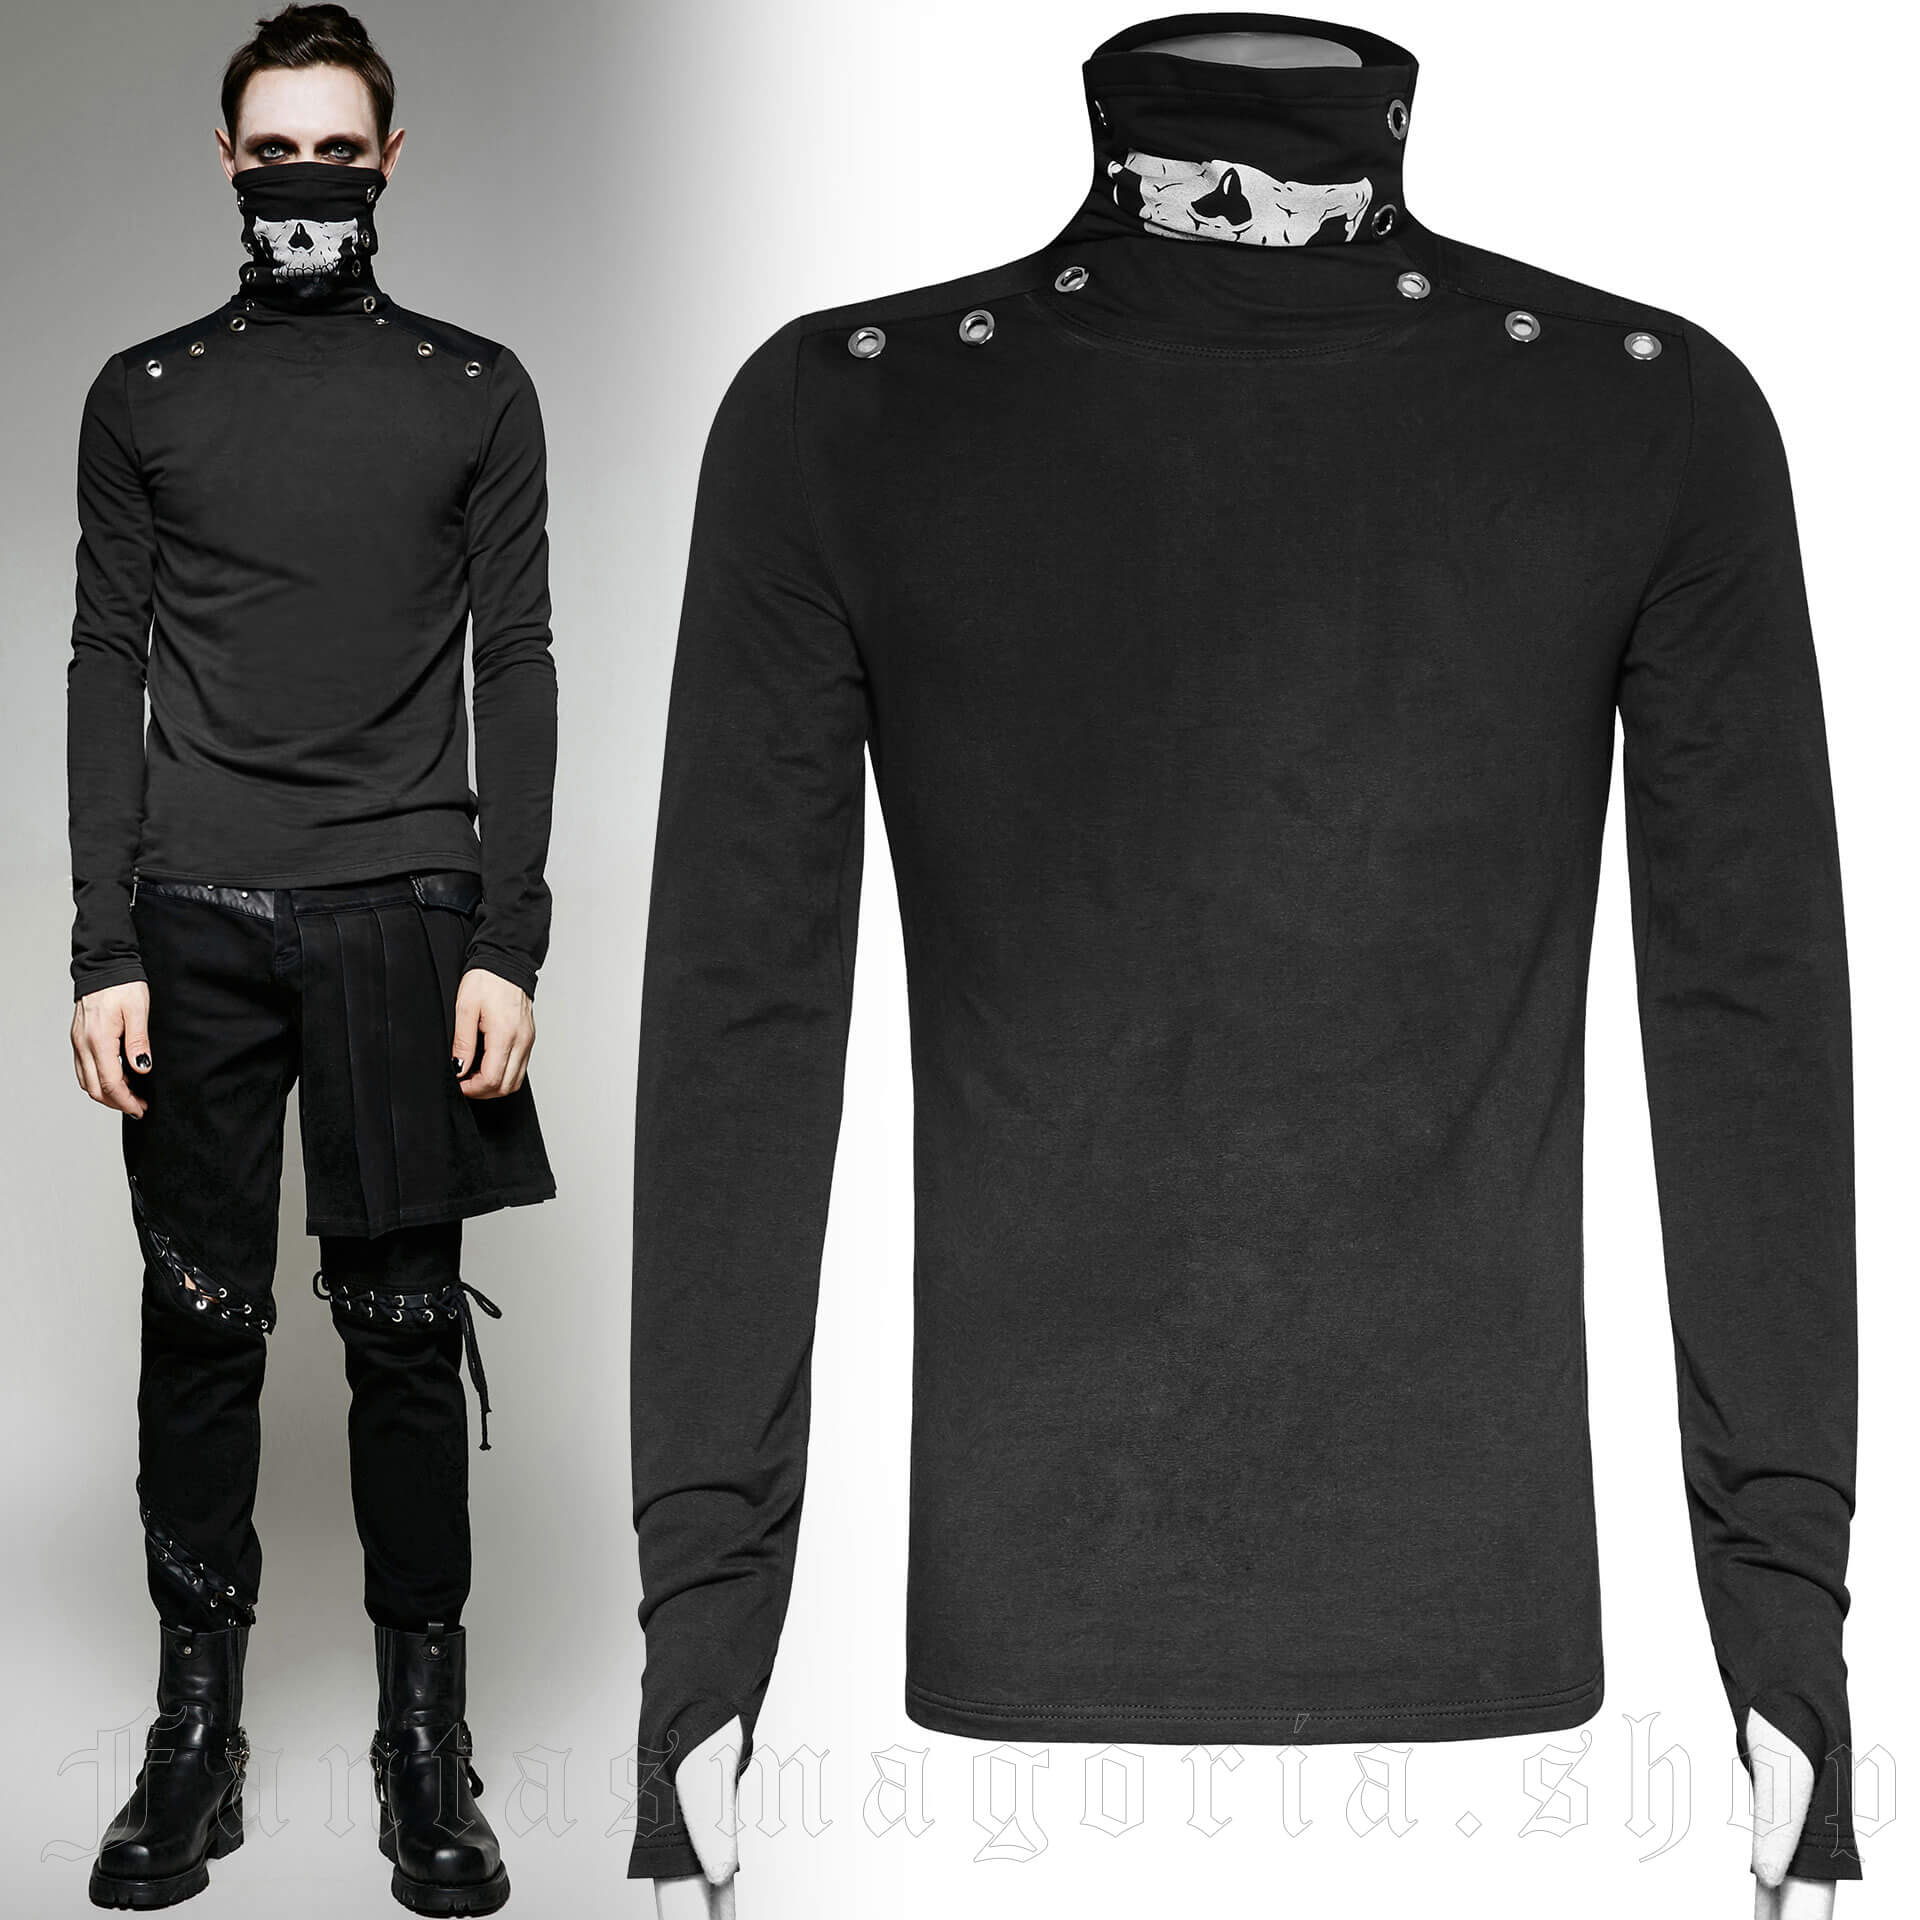 Long-sleeves turtleneck top by Punk Rave.. Punk Rave T-439.